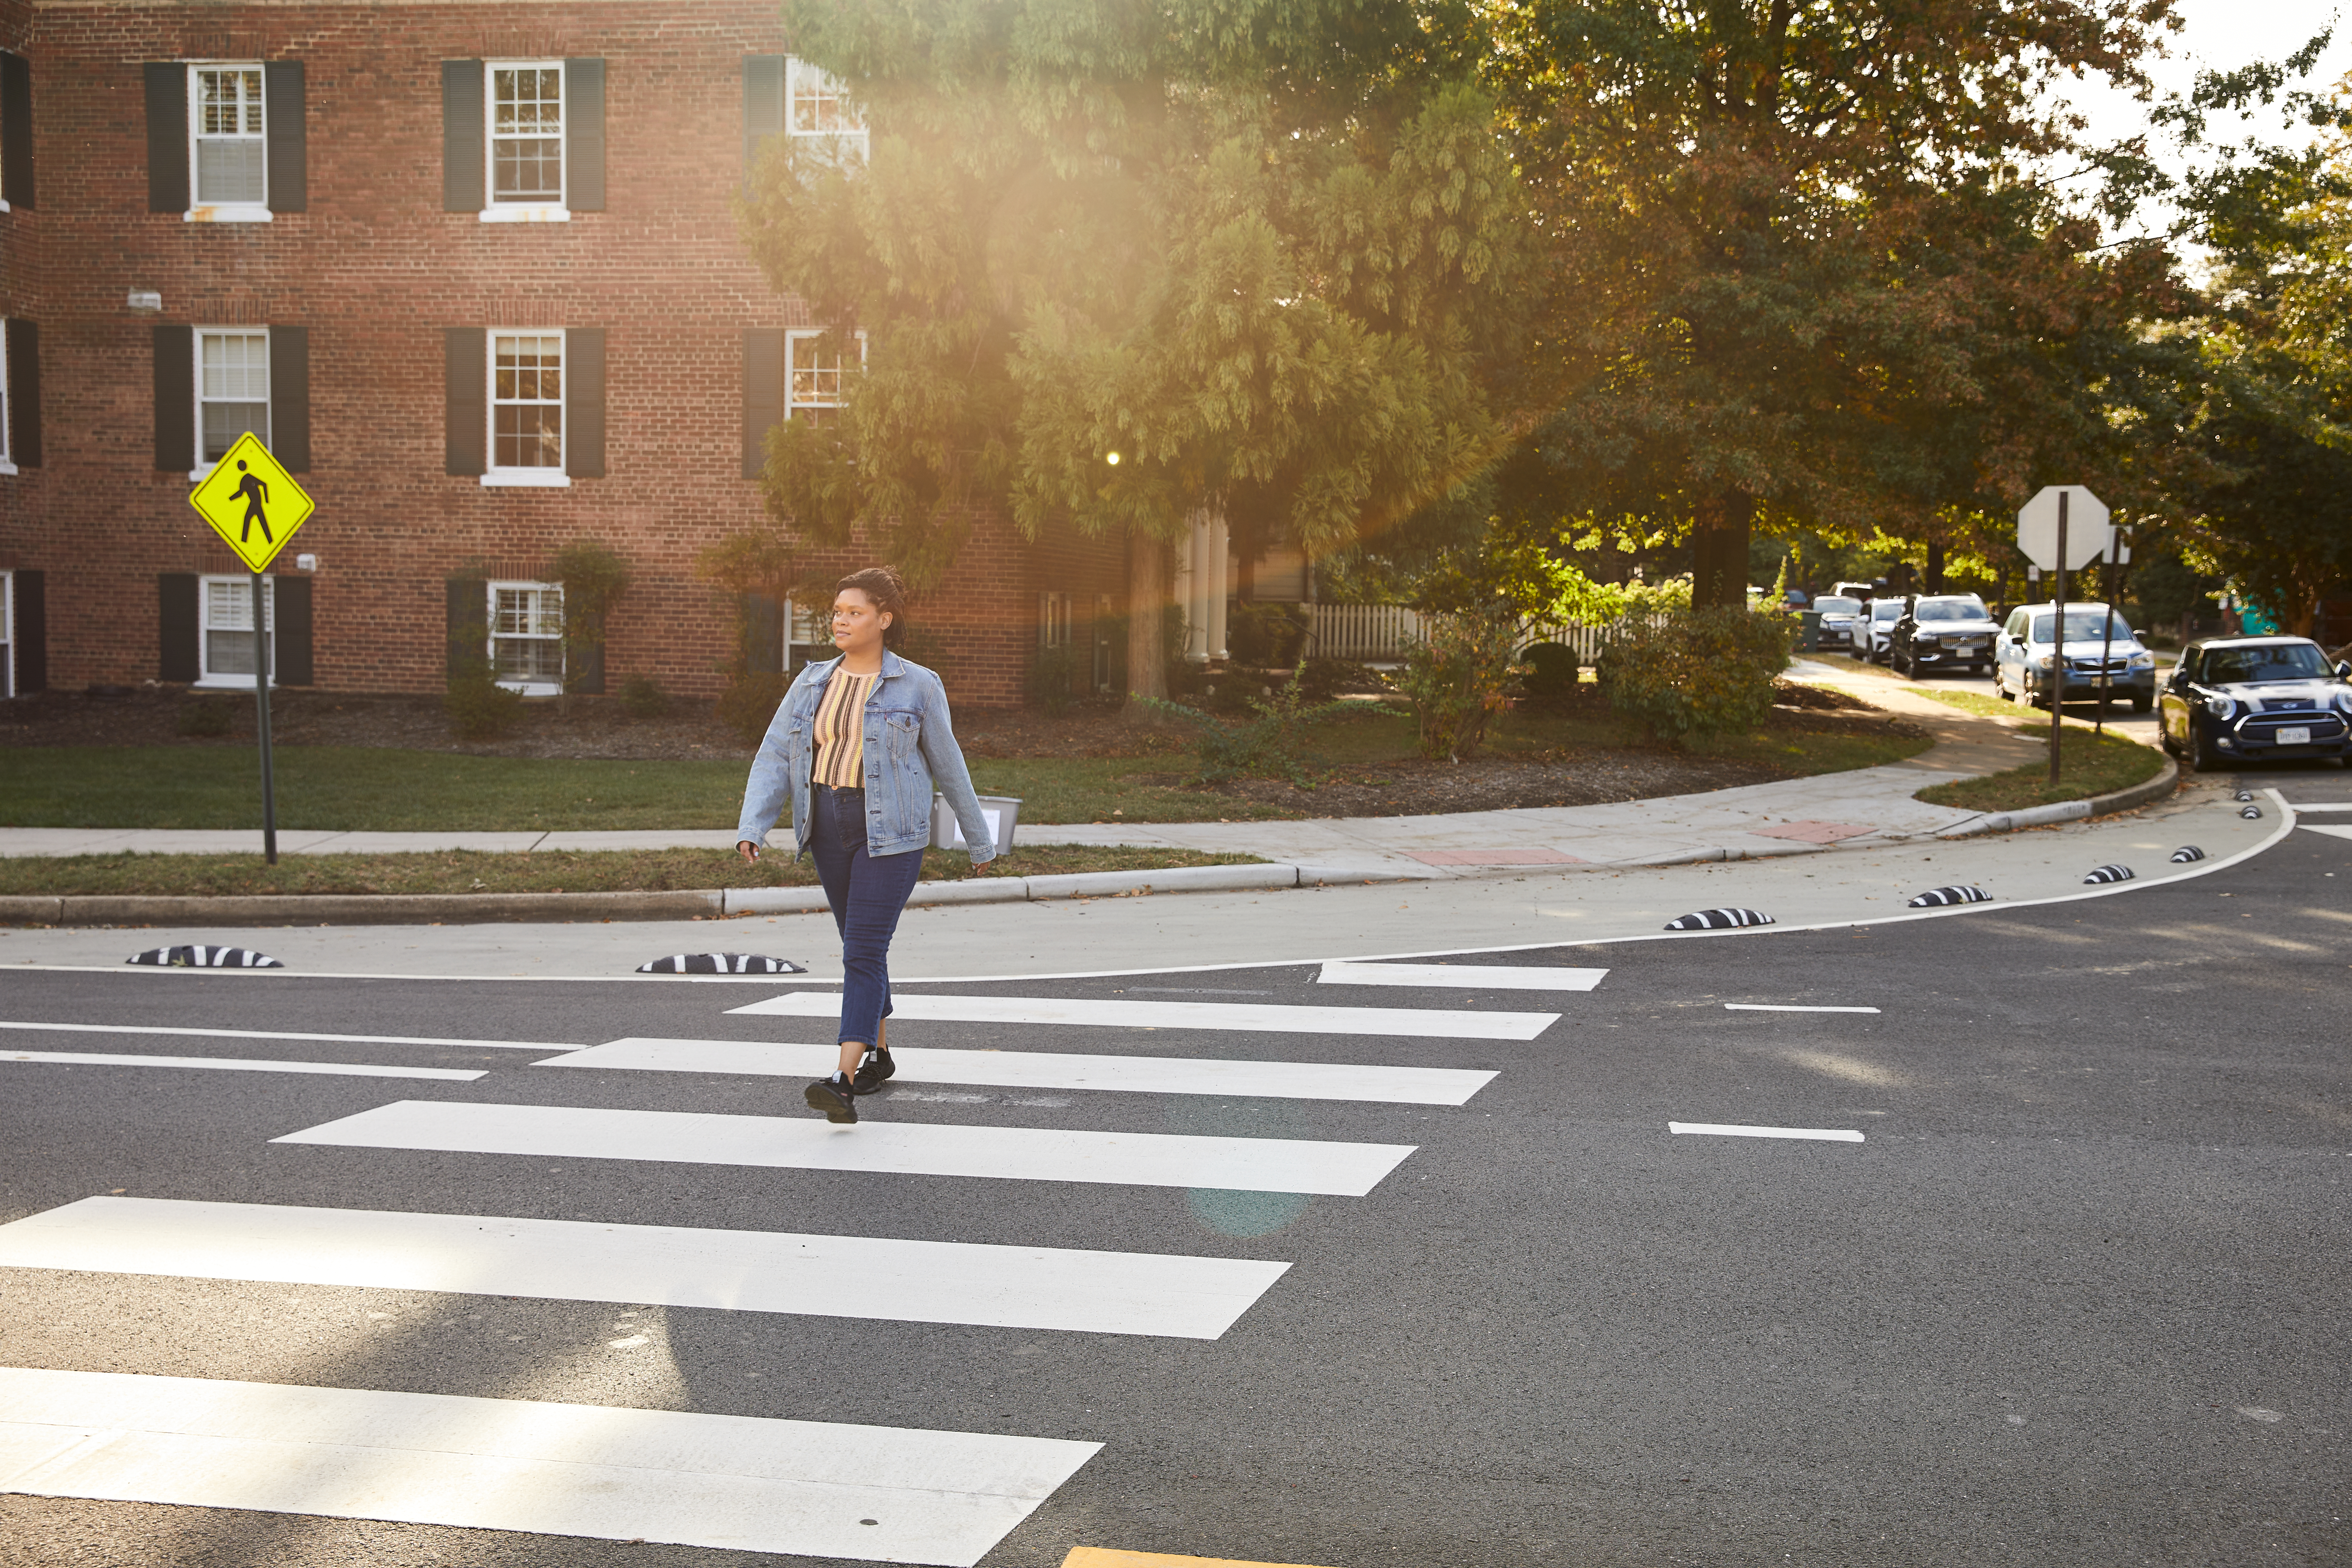 A pedestrian utilizes the upgraded crosswalk to cross Commonwealth Ave.